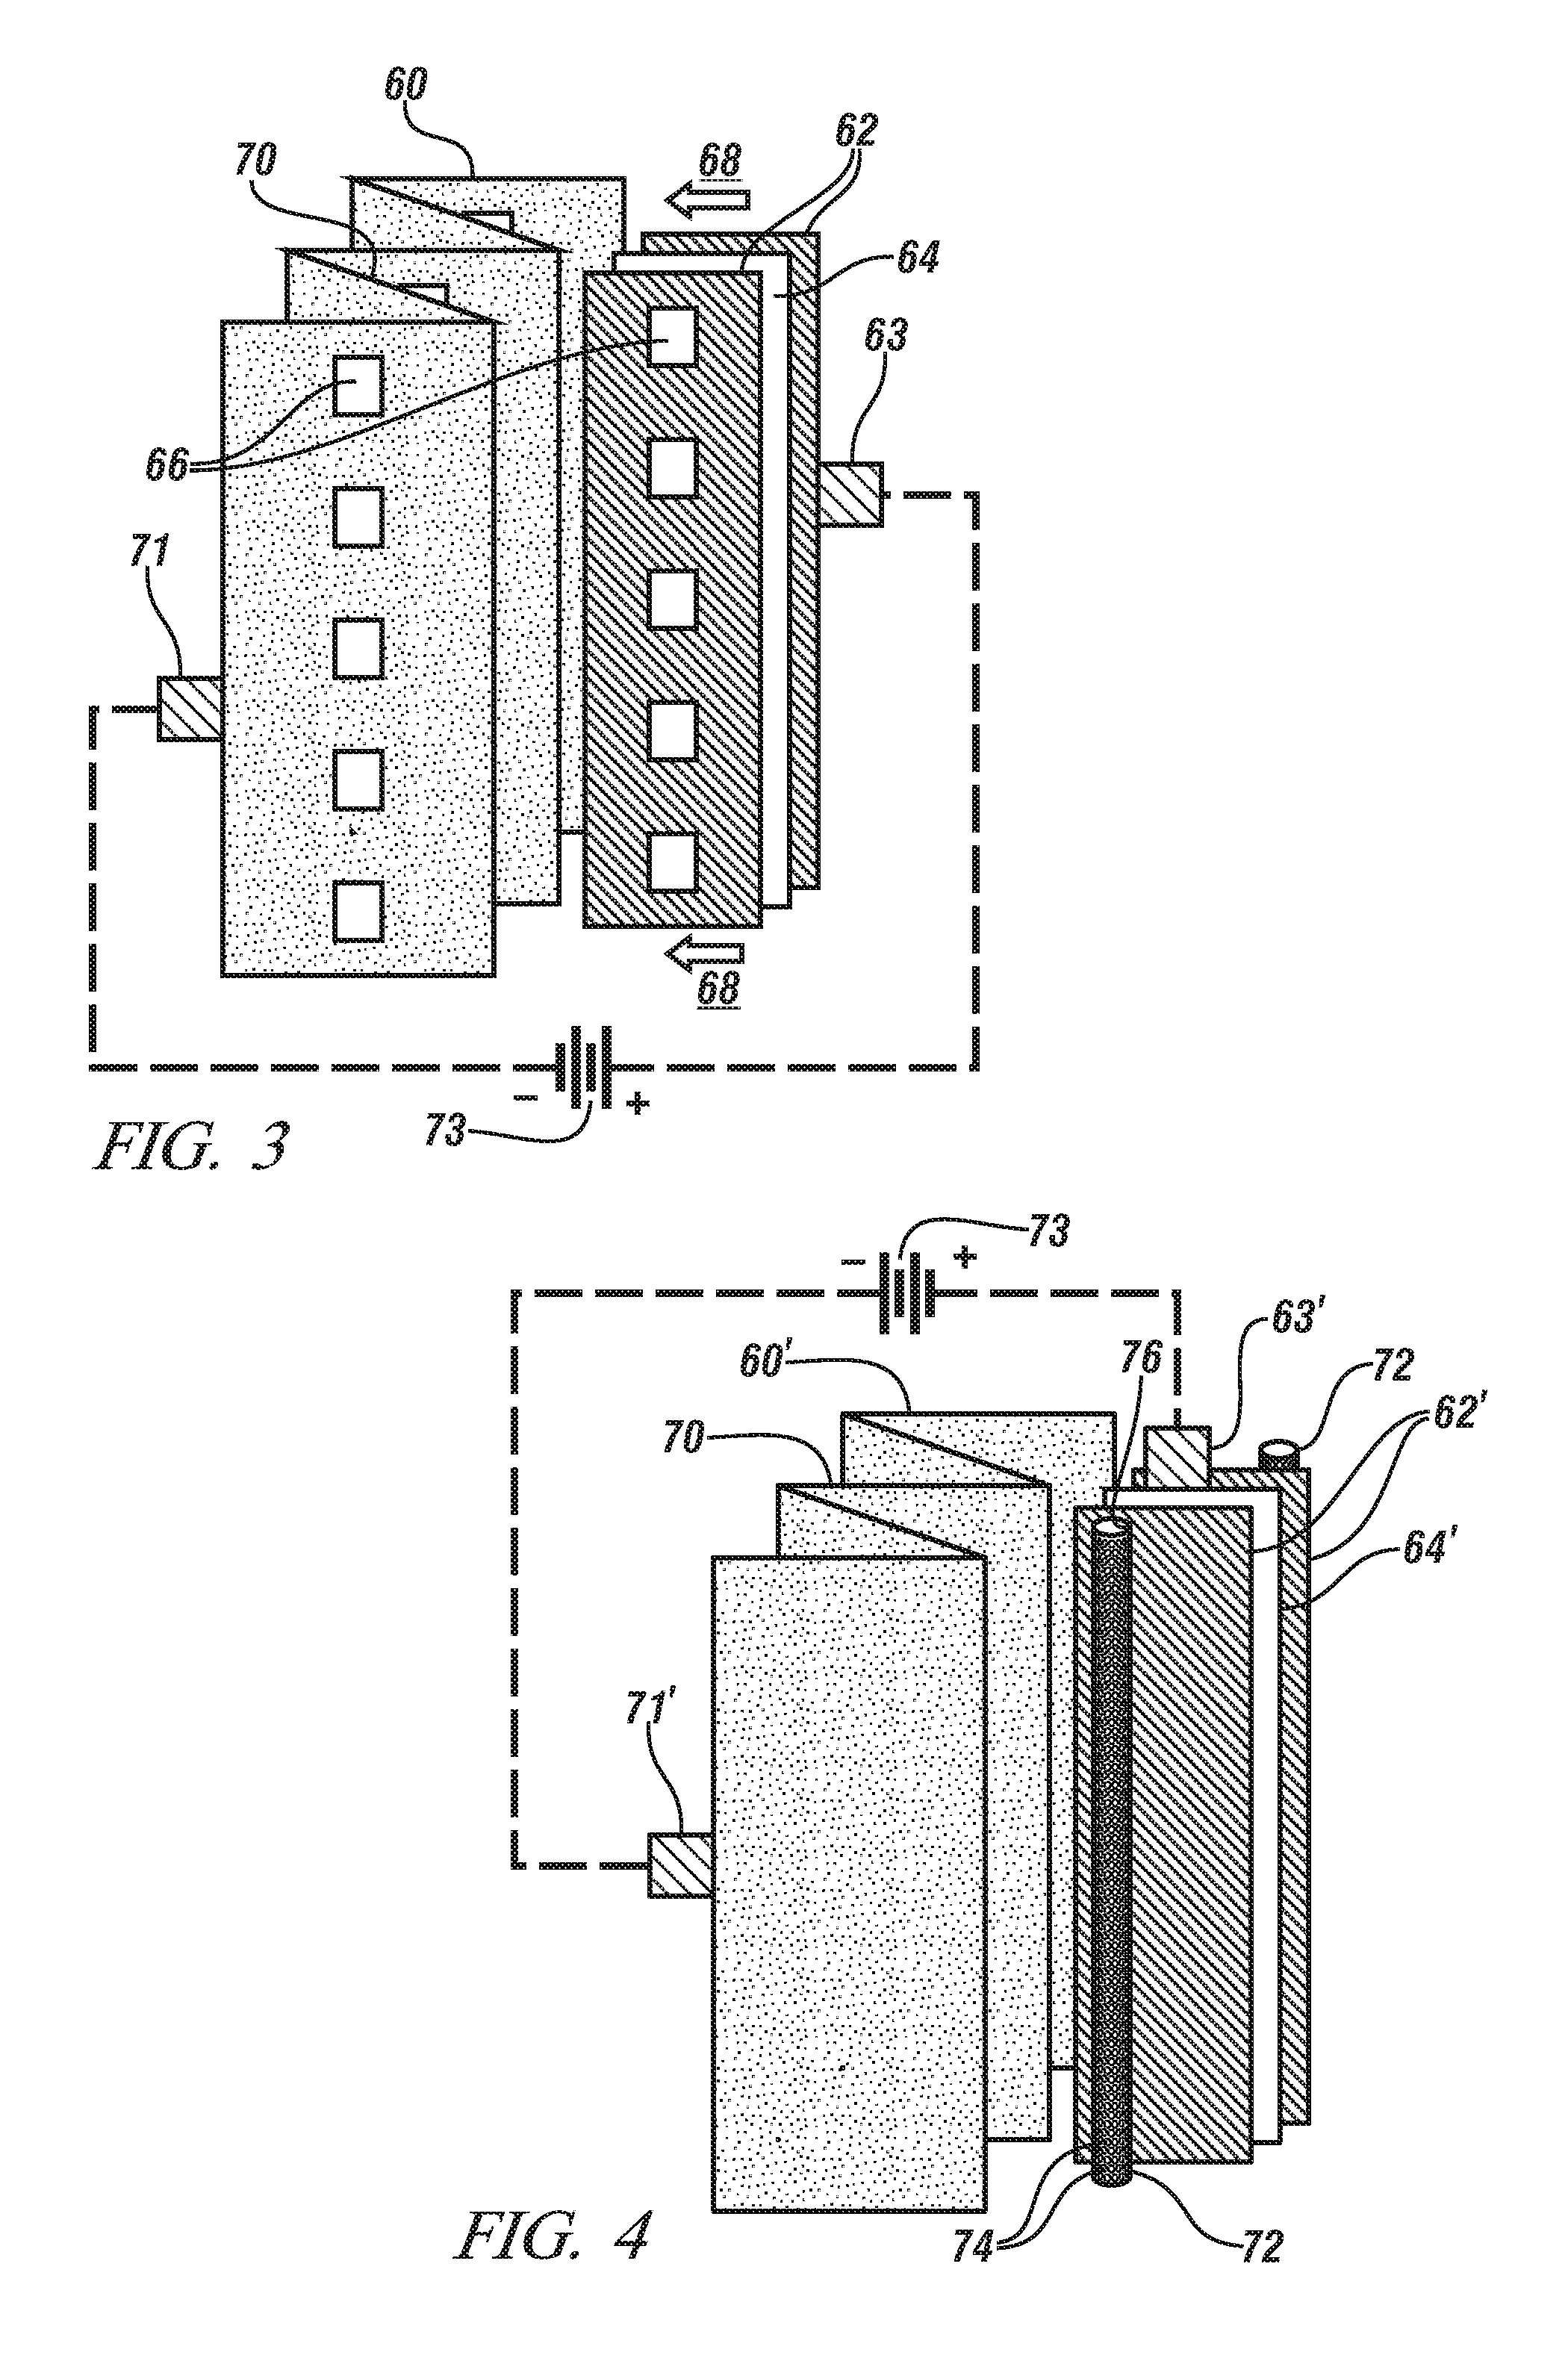 Electrochemical process and device for hydrogen generation and storage